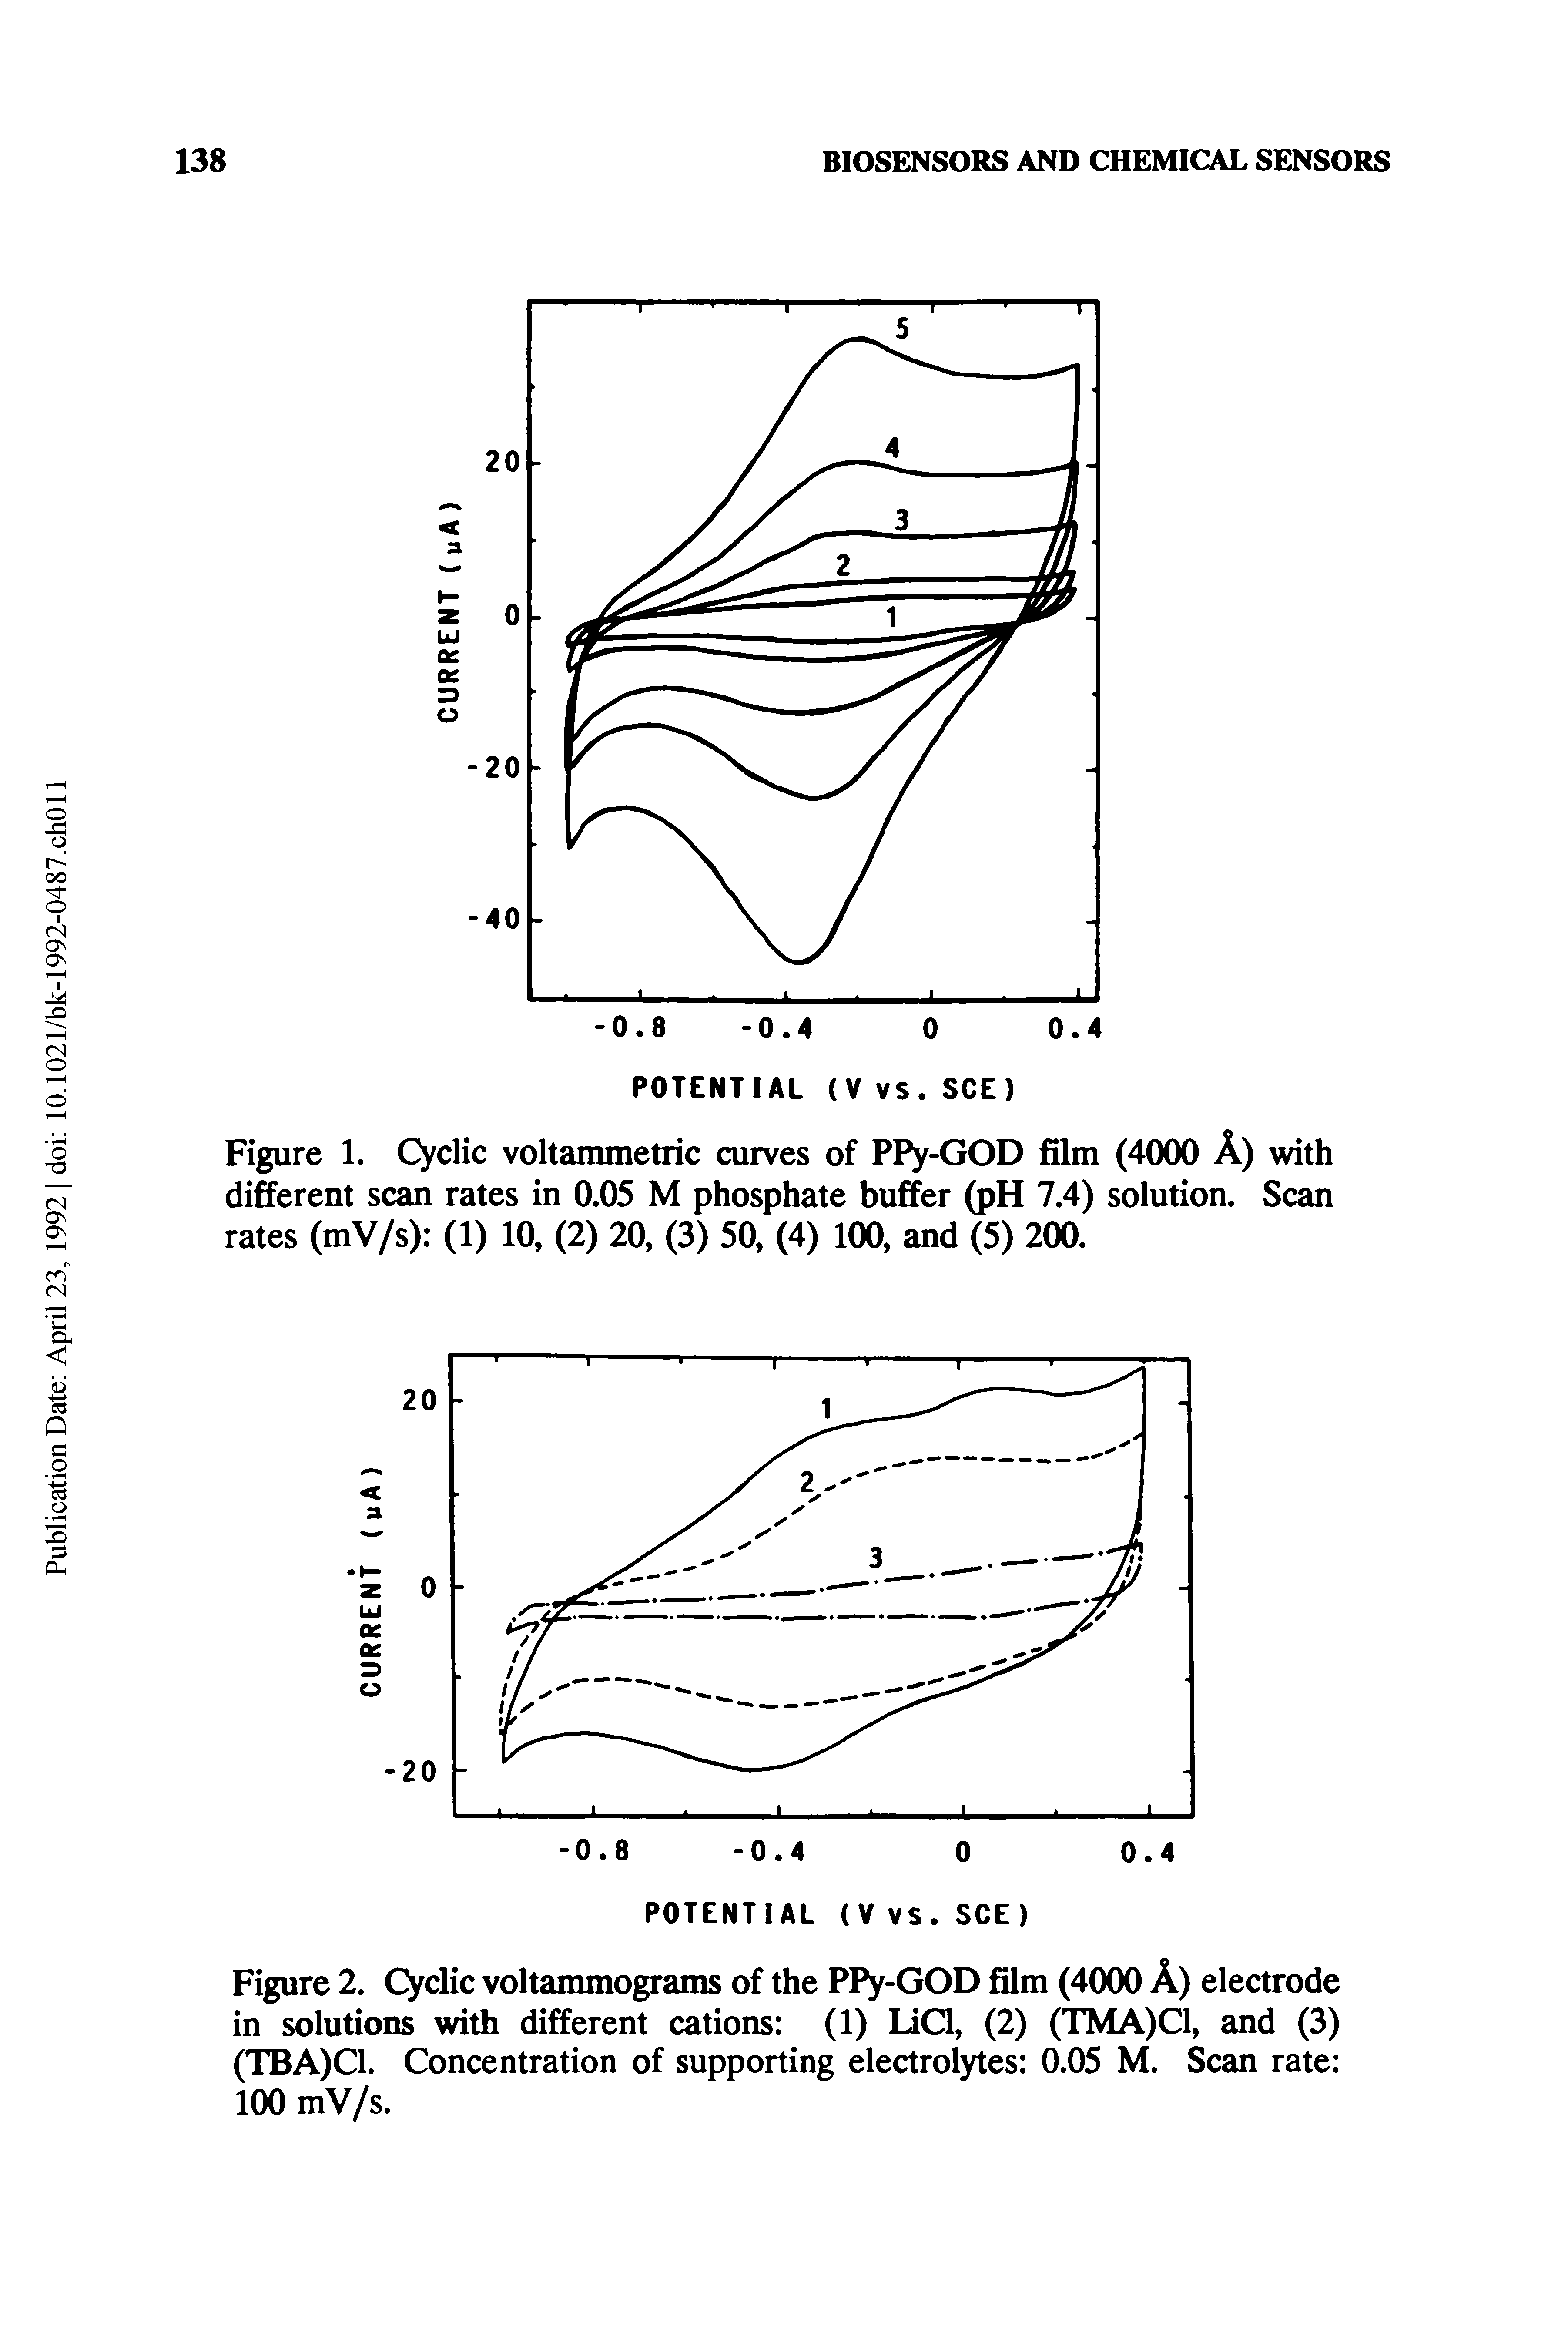 Figure 1. Cyclic voltammetric curves of PPy-GOD film (4000 A) with different scan rates in 0.05 M phosphate buffer (pH 7.4) solution. Scan rates (mV/s) (1) 10, (2) 20, (3) 50, (4) 100, and (5) 200.